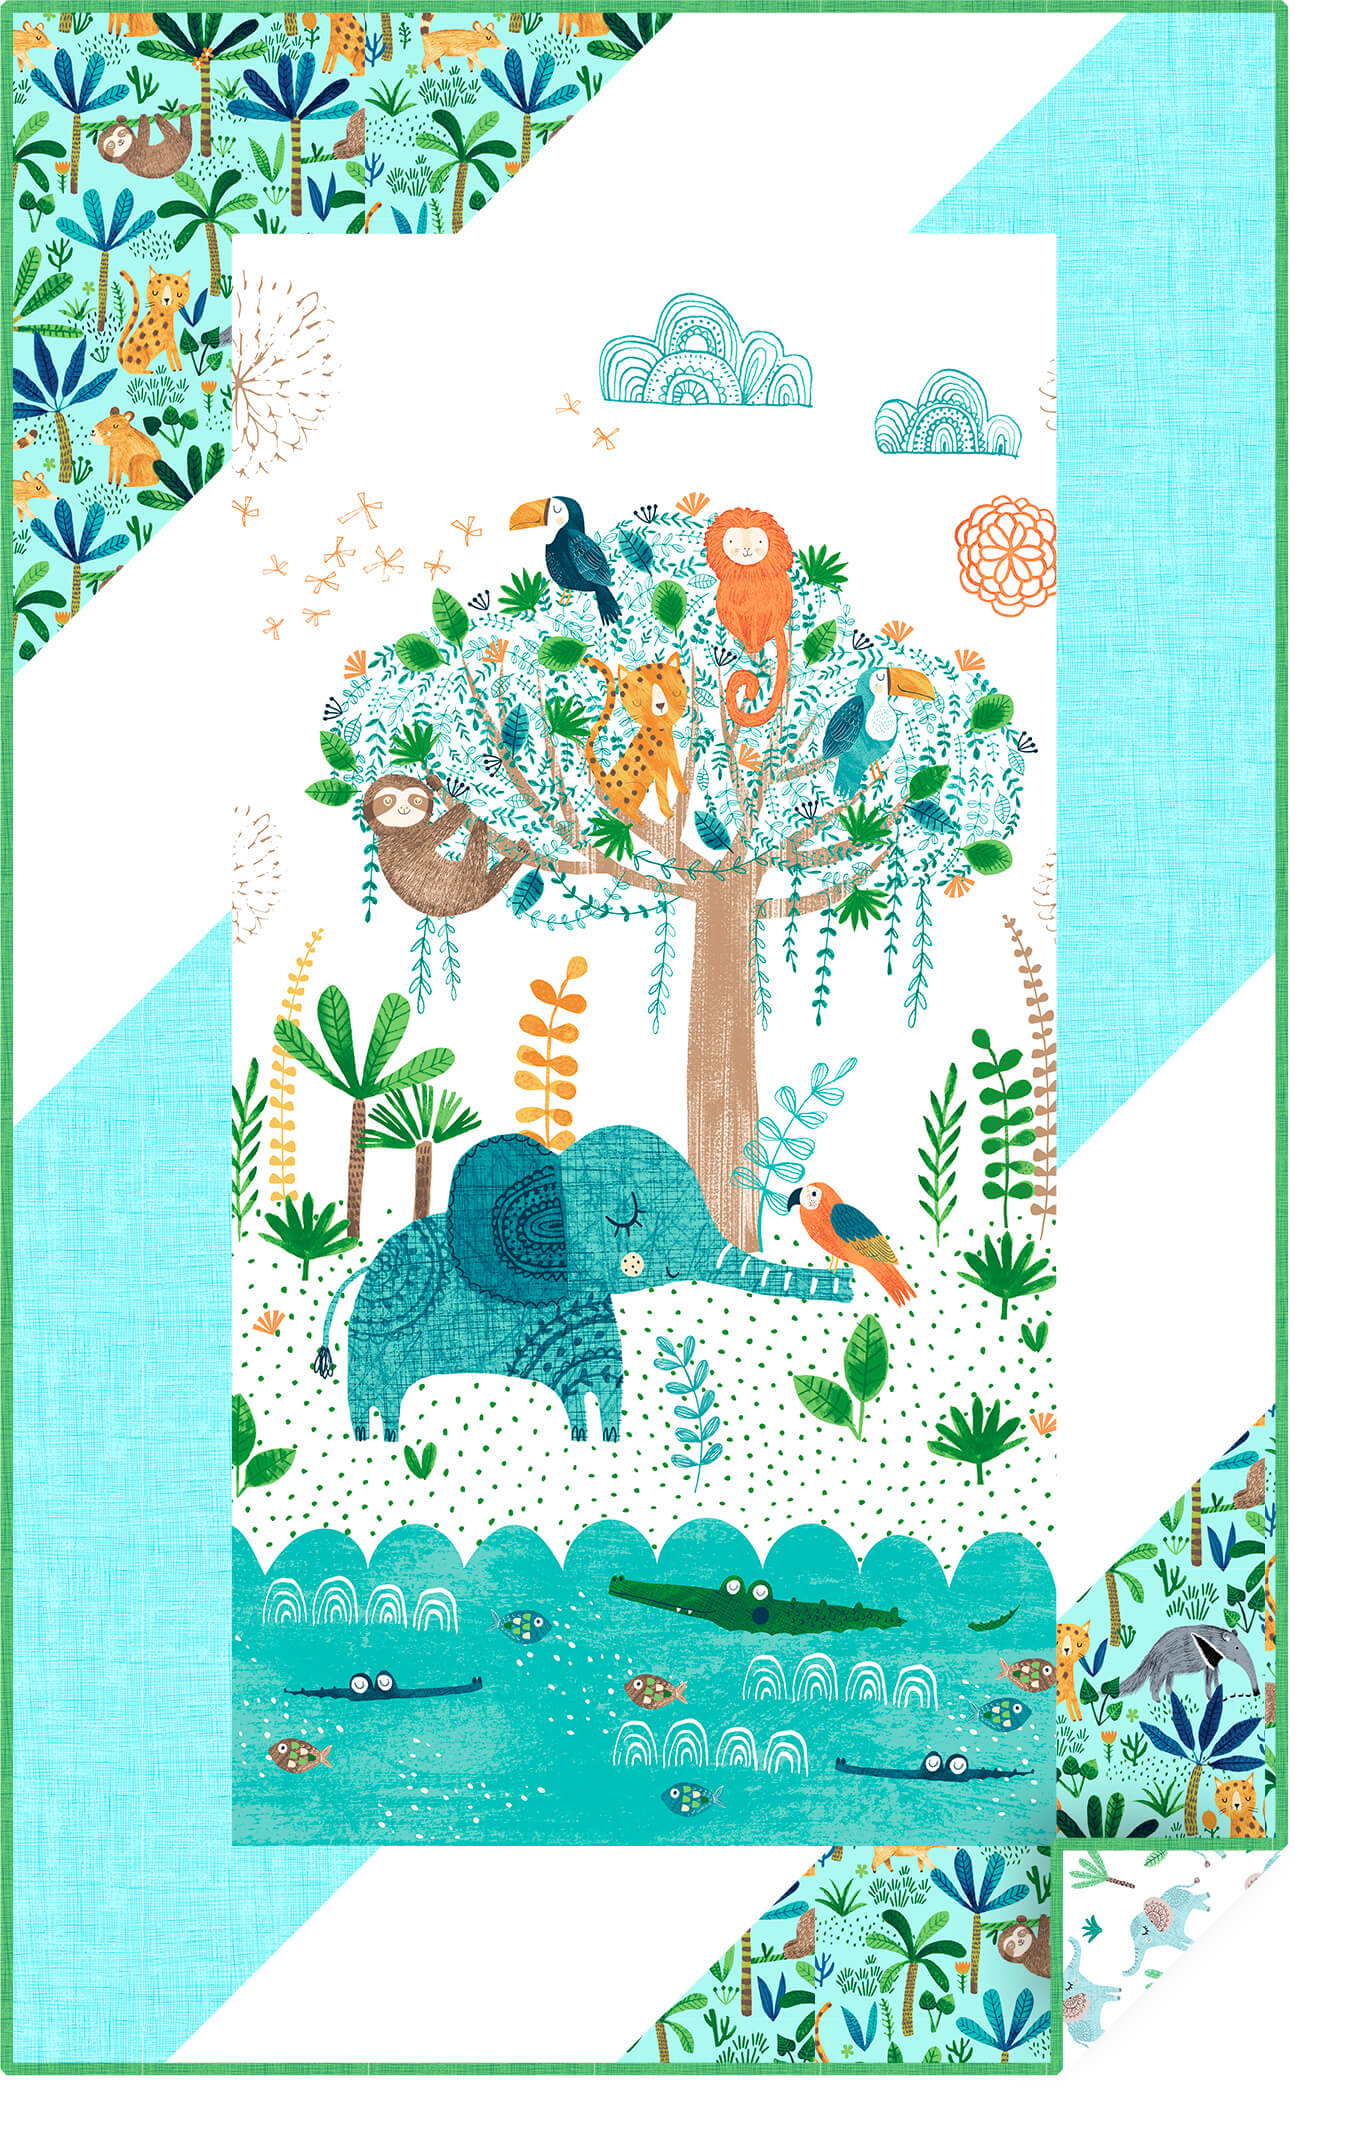 A charming baby quilt from Clothworks featuring Jungle Fever by Rebecca Jones 34” x 55”. This digital quilt showcases fabric that will ship in April 2018. www.clothworks.com